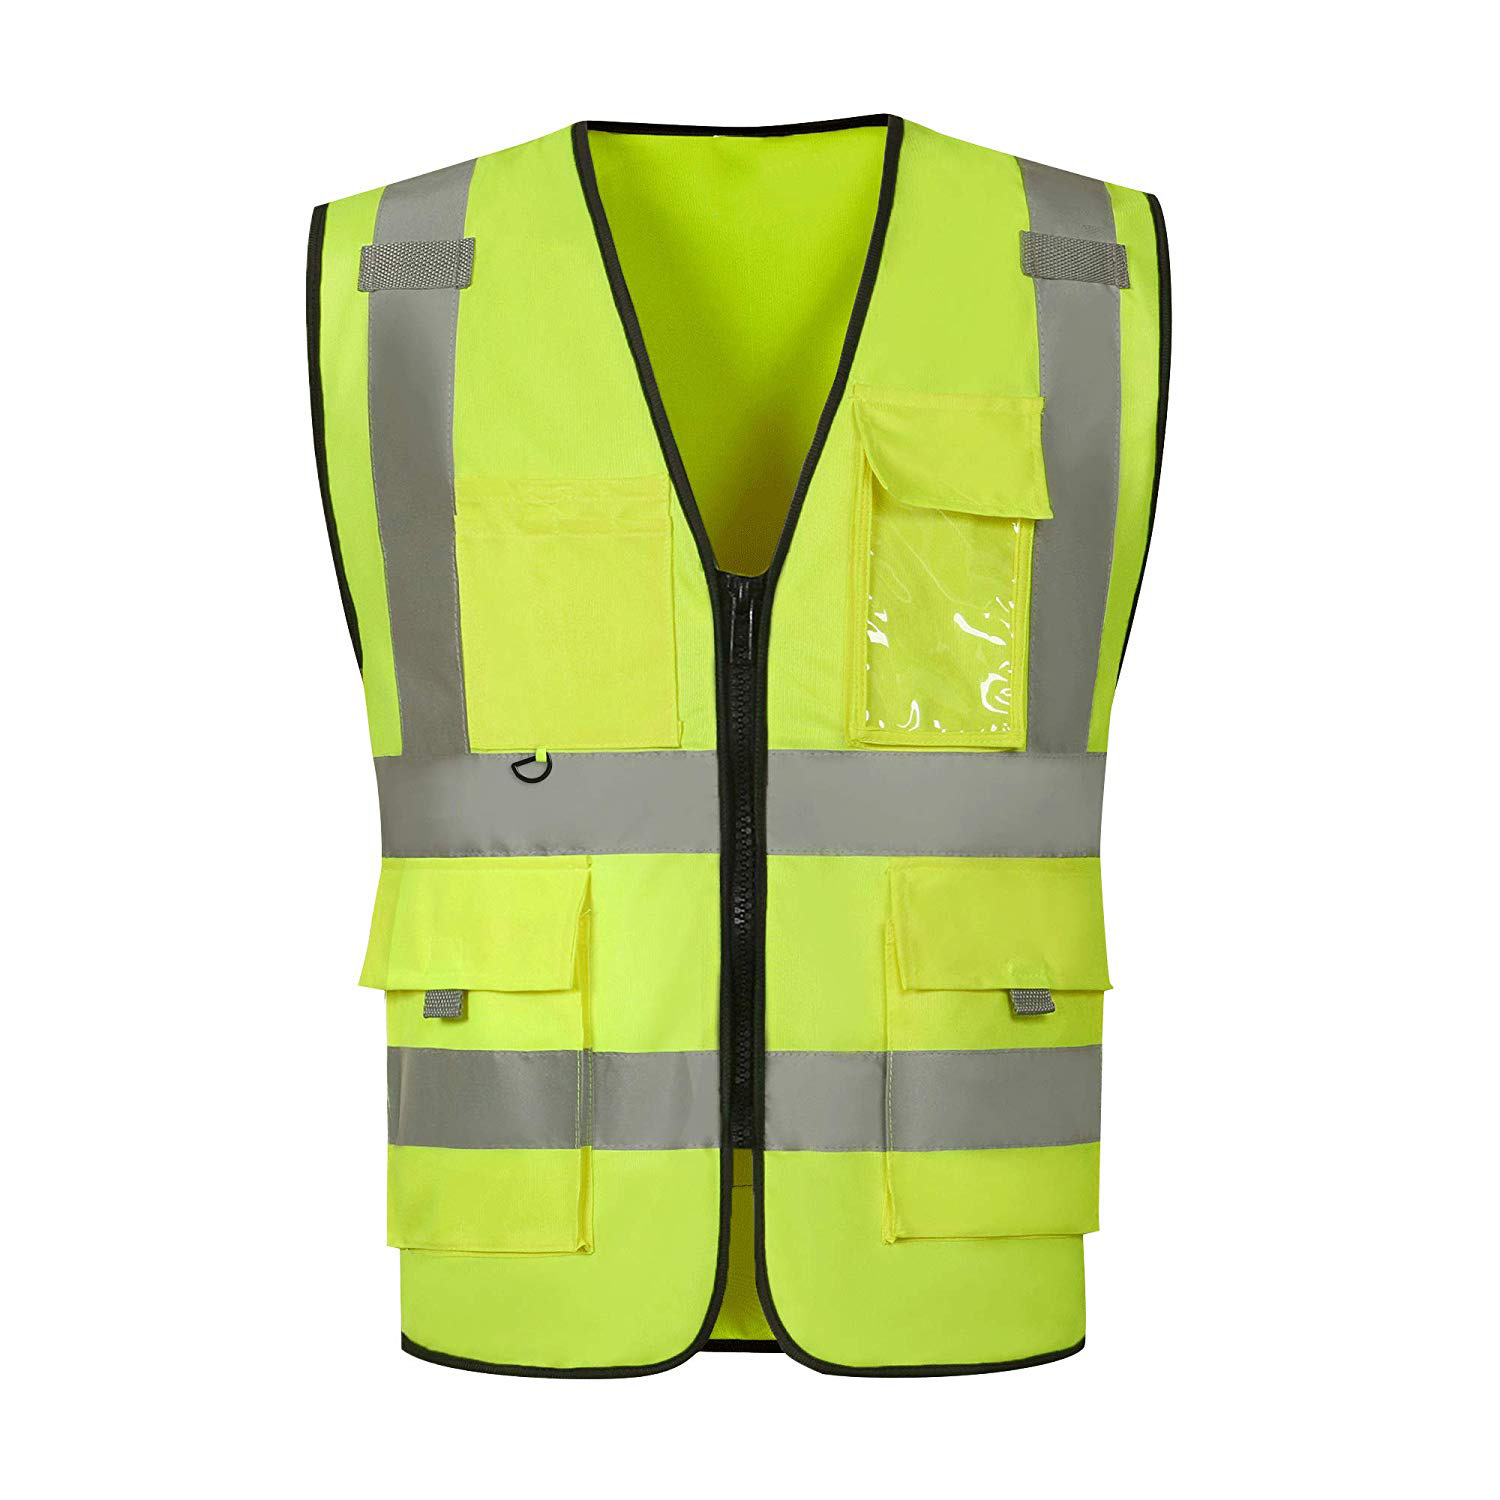 Safety Vest – Lead Safety focuses on Traffic safety Equipment & Working ...